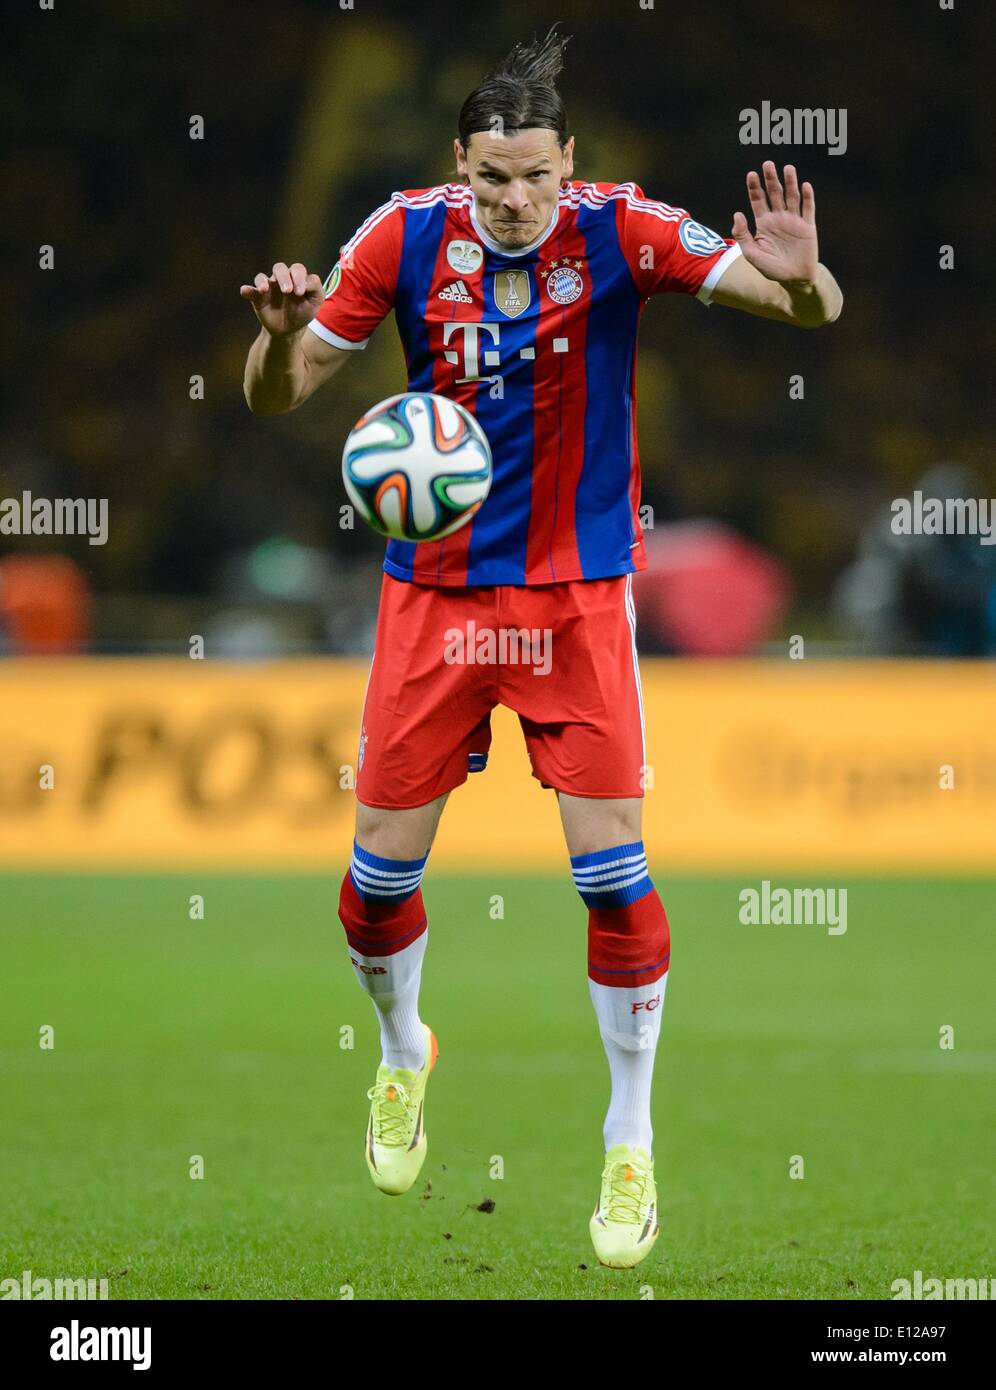 Berlin, Germany. 17th May, 2014. Munich's Daniel van Buyten in action during the DFB Cup final between Borussia Dortmund and FC Bayern Munich at the Olympic Stadium in Berlin, Germany, 17 May 2014. Photo: Thomas Eisenhuth/dpa/Alamy Live News Stock Photo